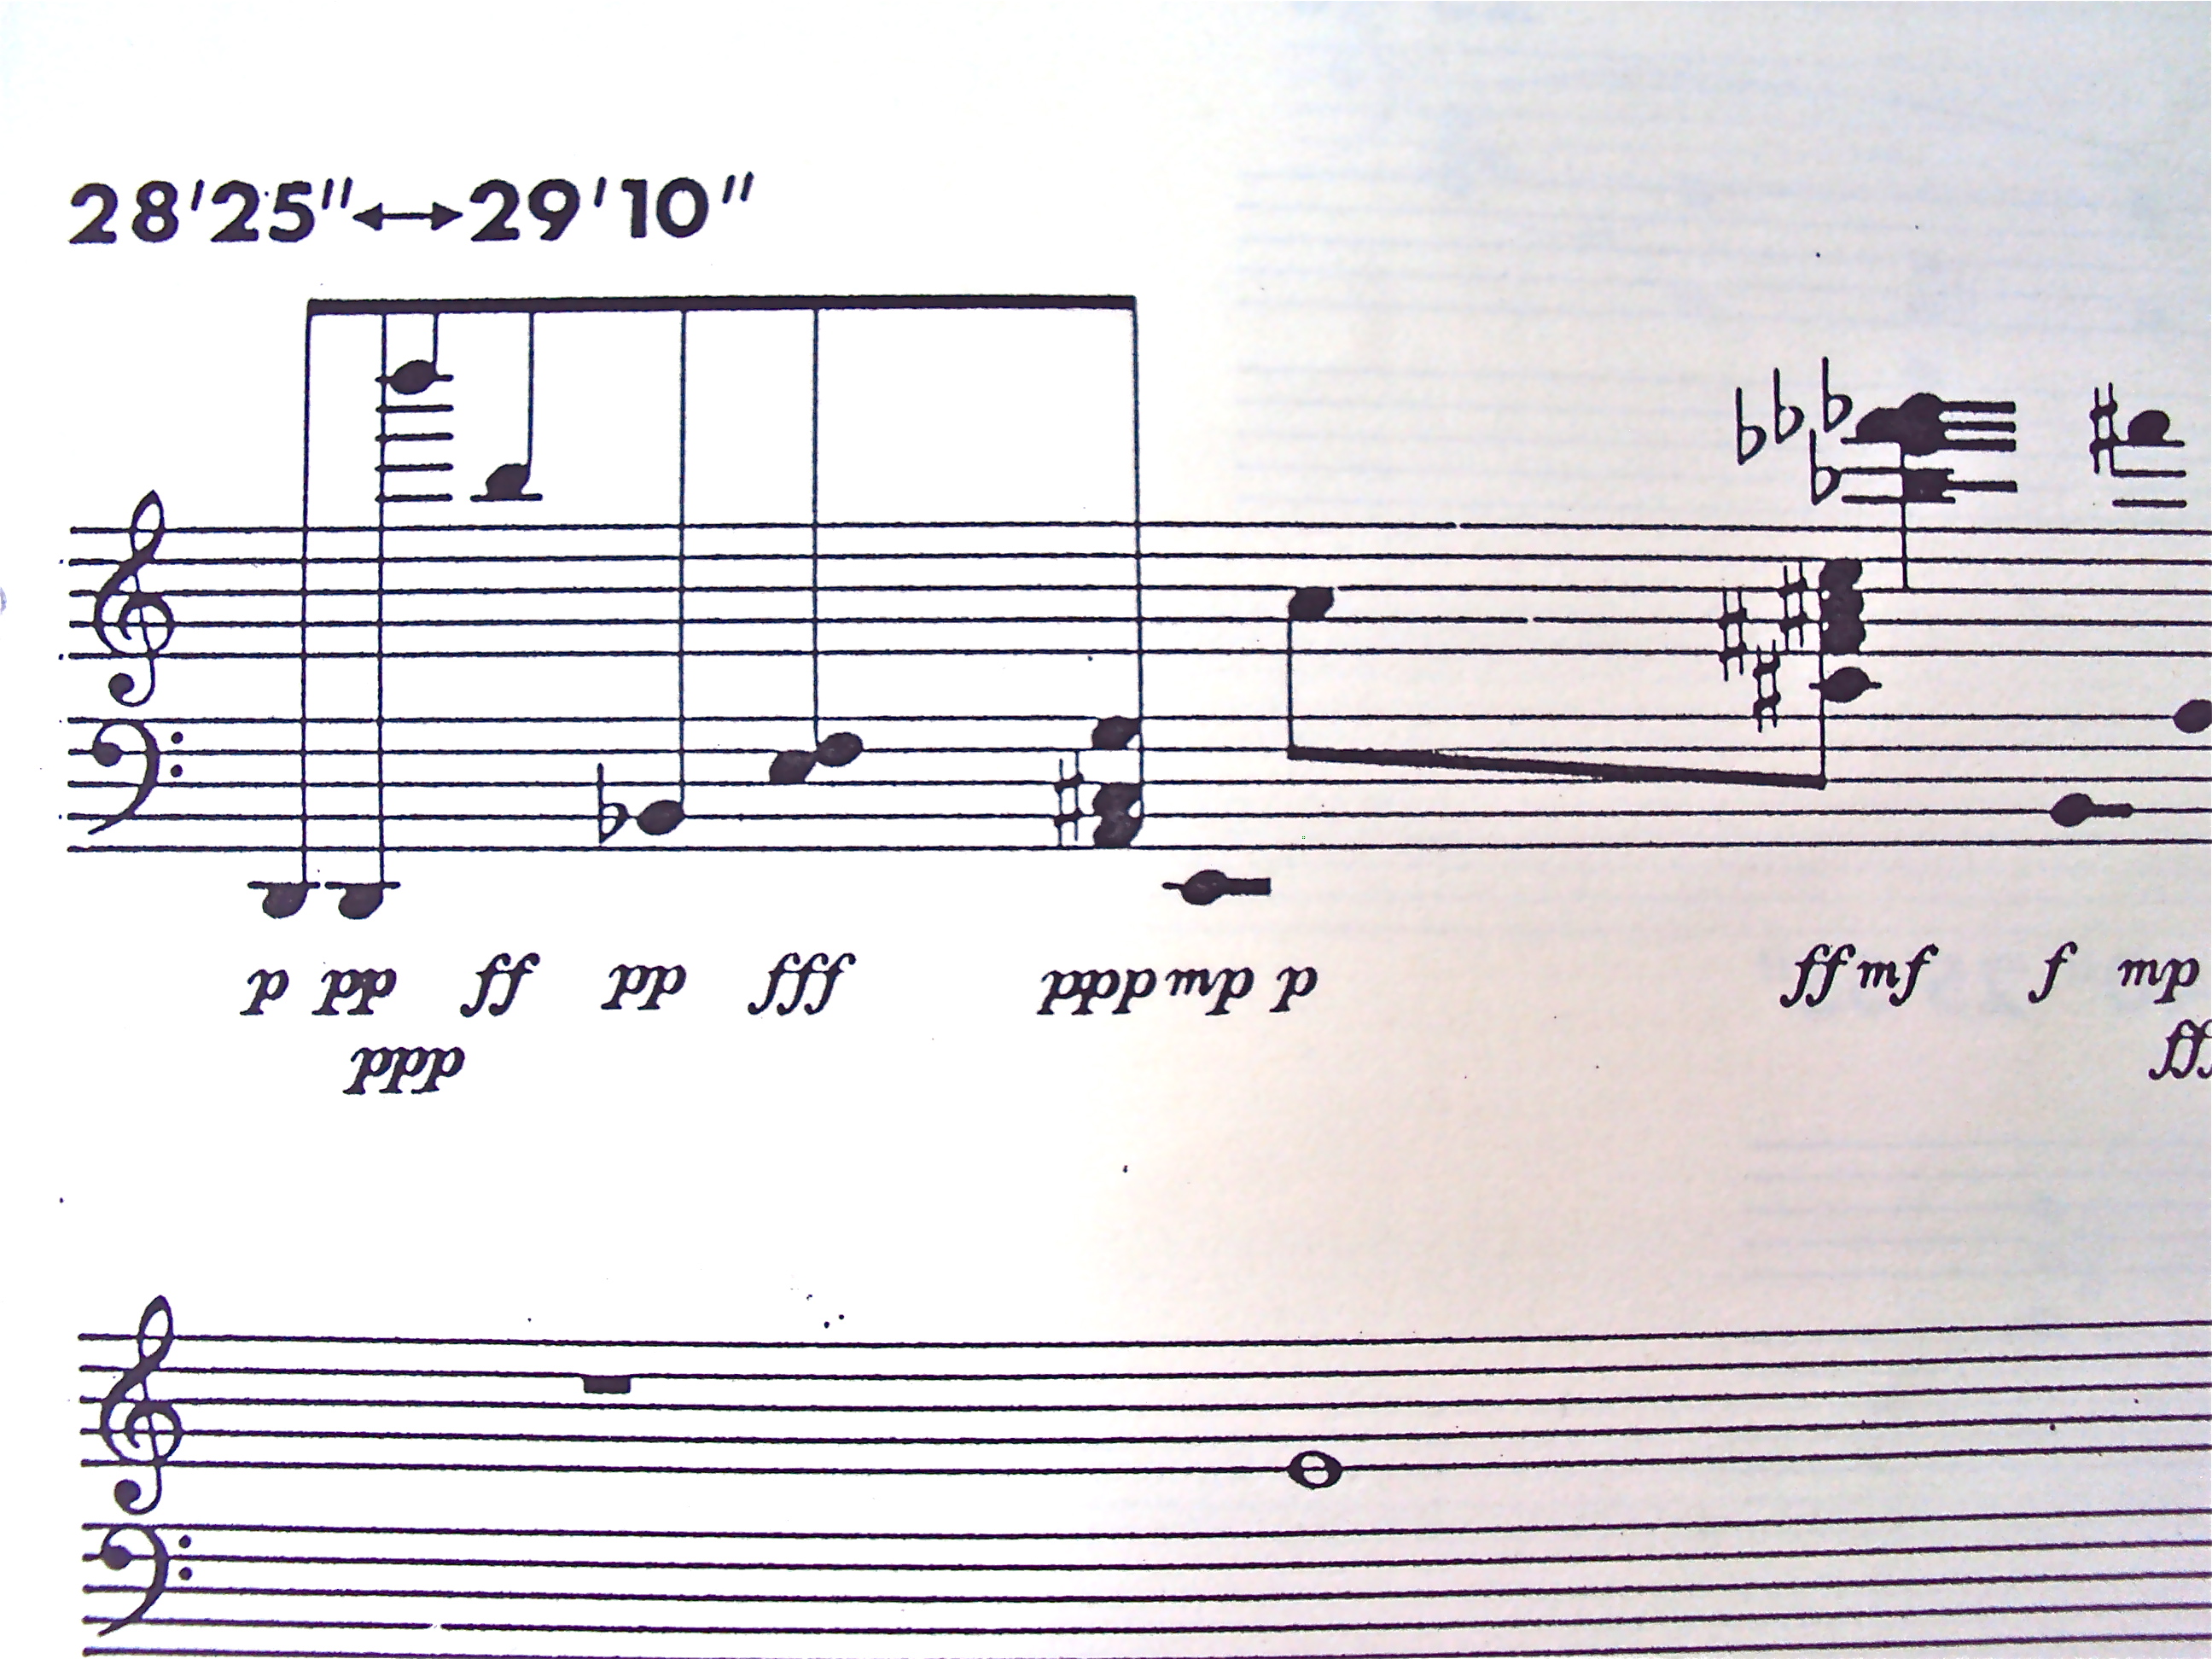 2. Music for-John Cage